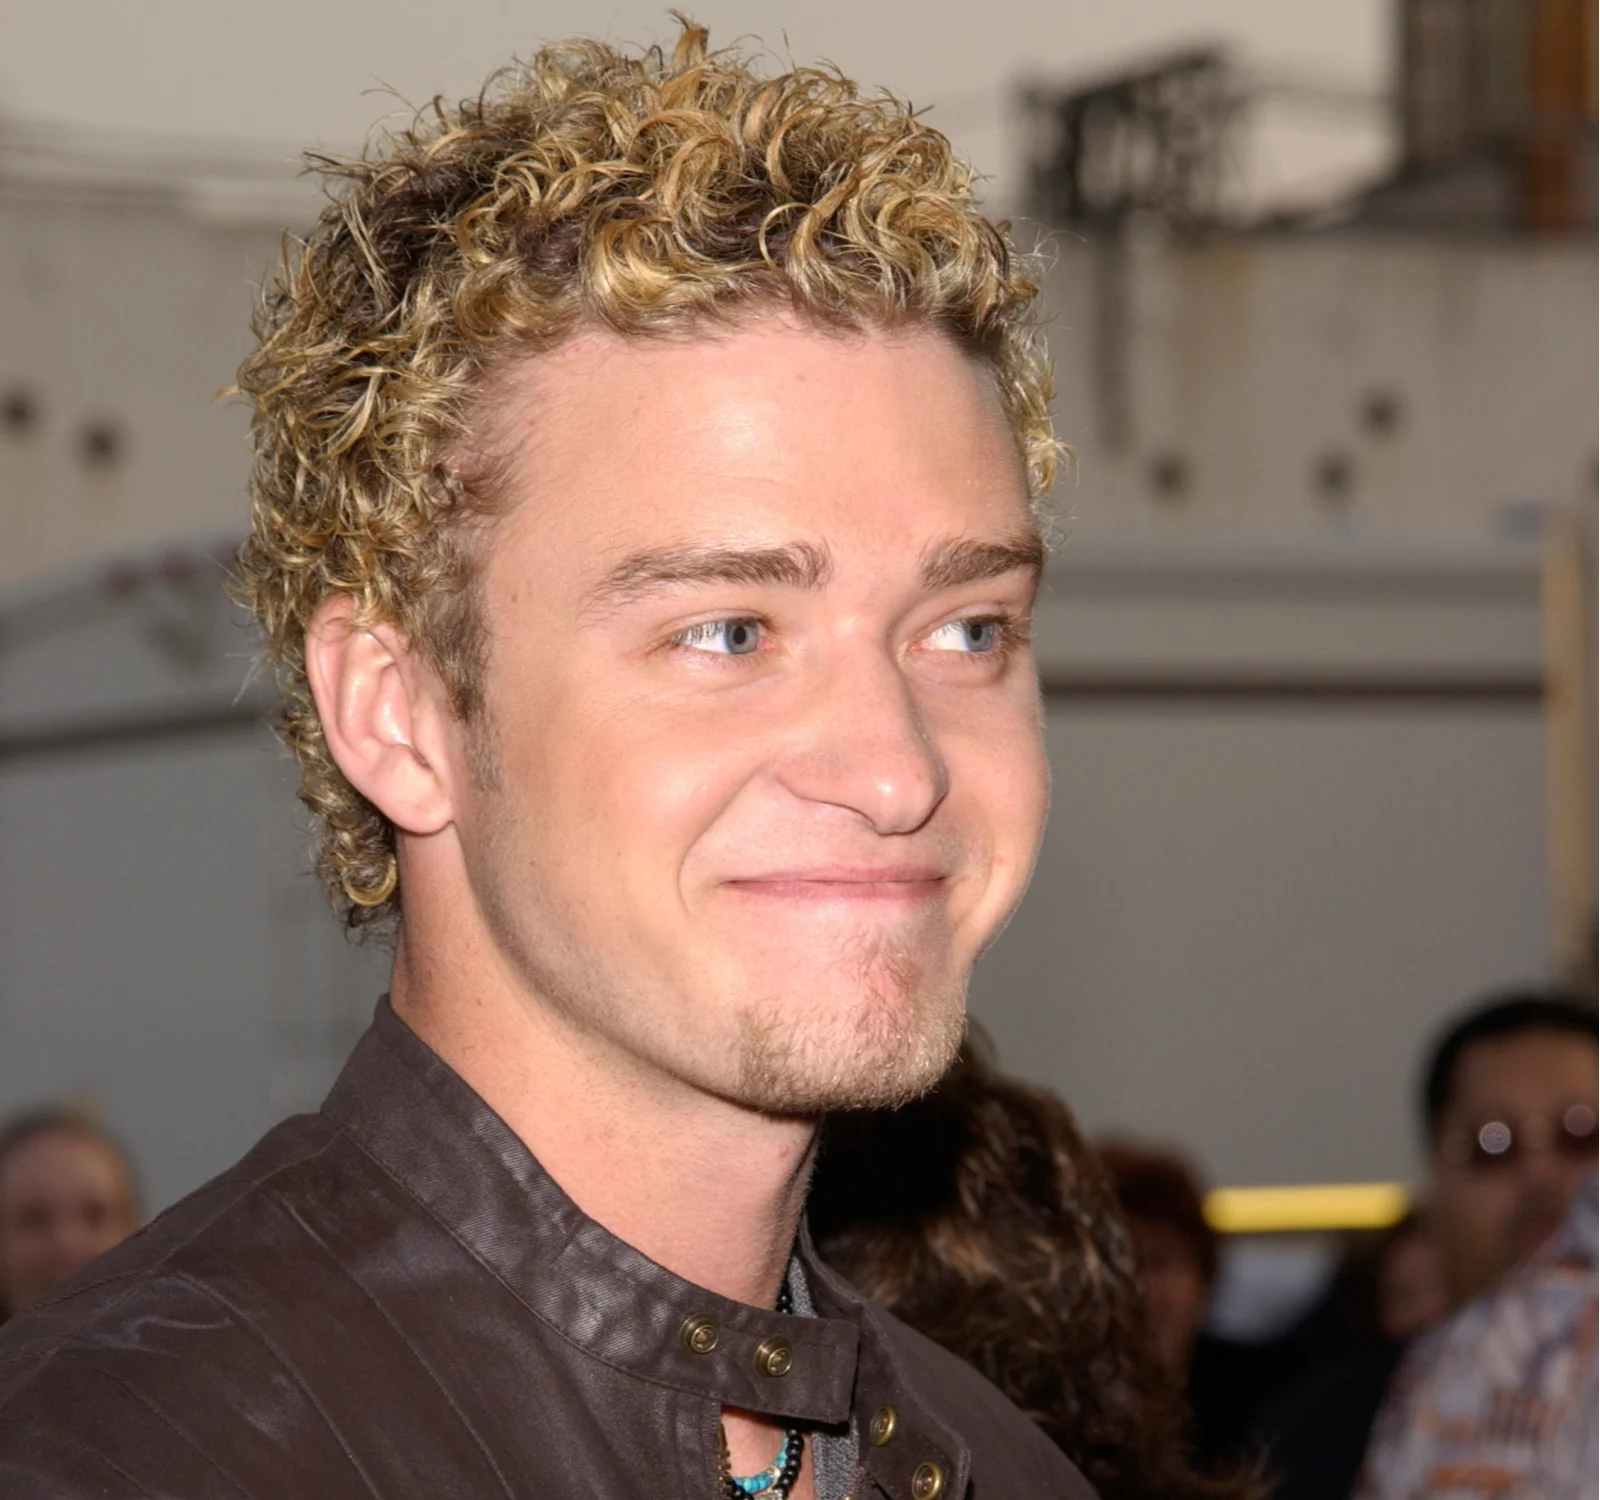 Justin Timberlake (with frosted tips) grinning at a premier event in a leather jacket